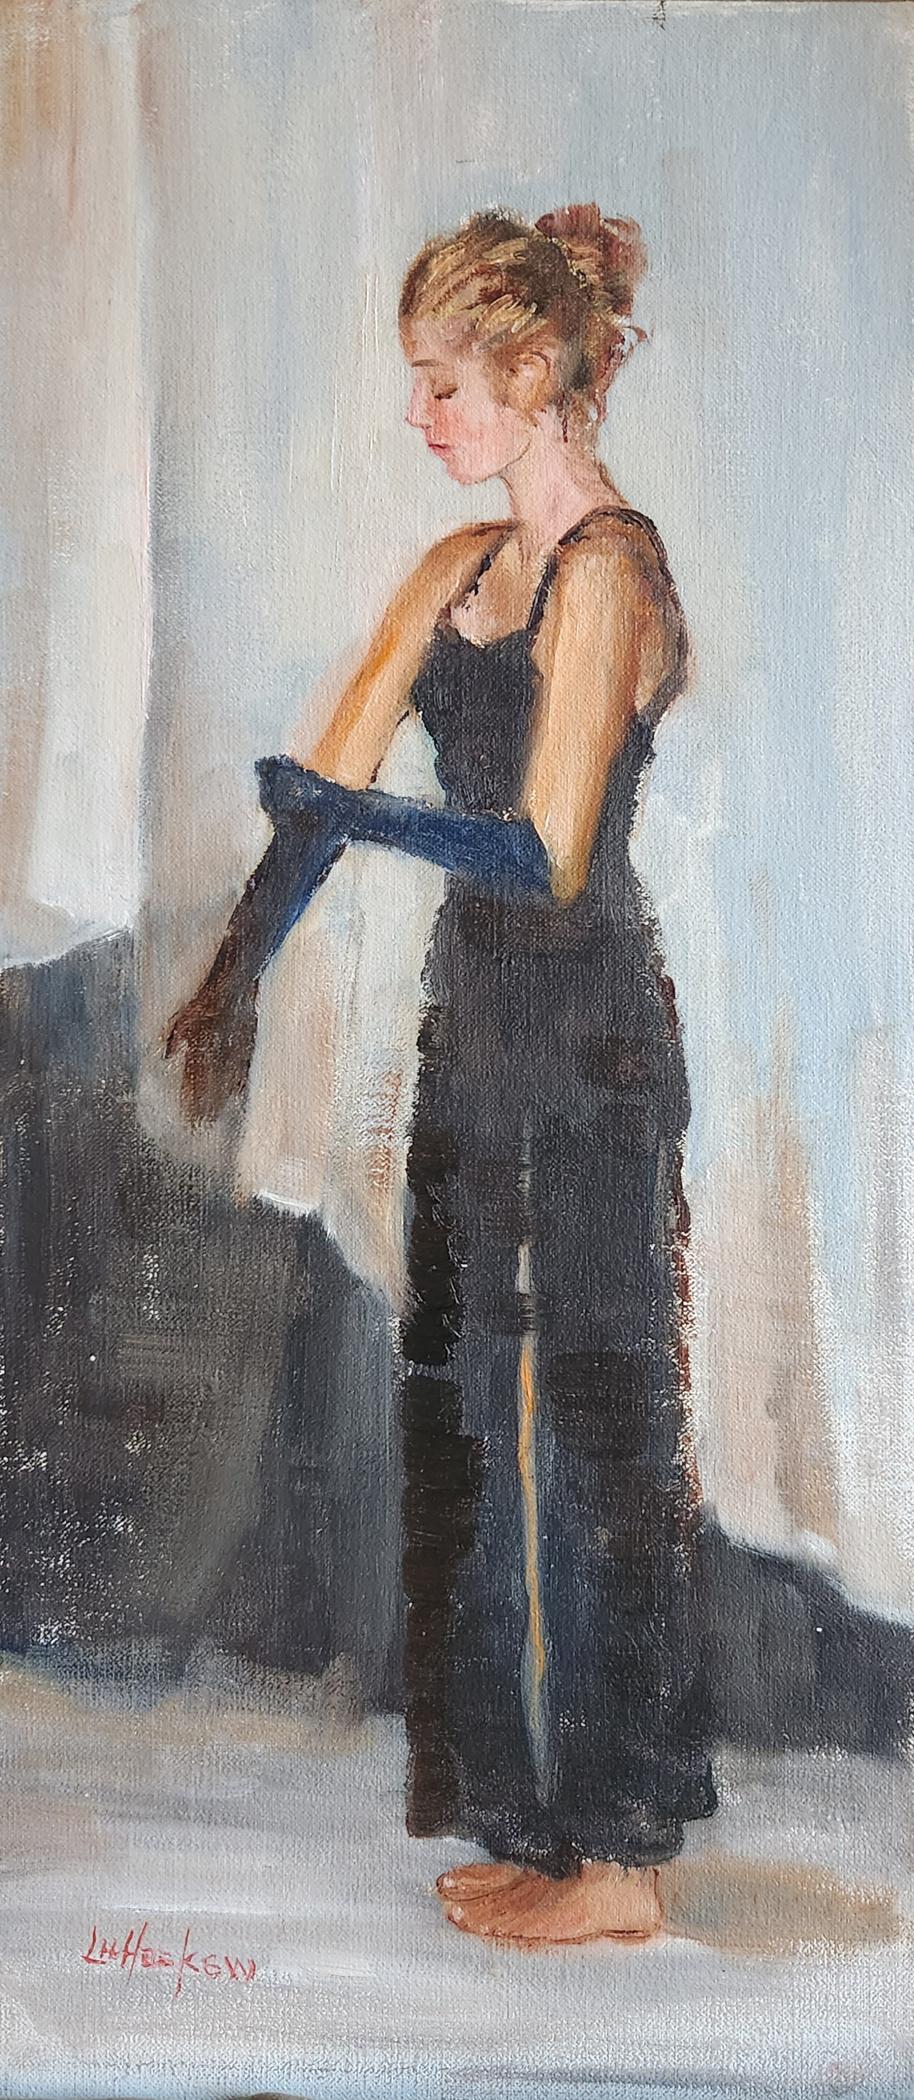 Lu Haskew Figurative Painting - Gloves for Prom, 14x6" oil on board